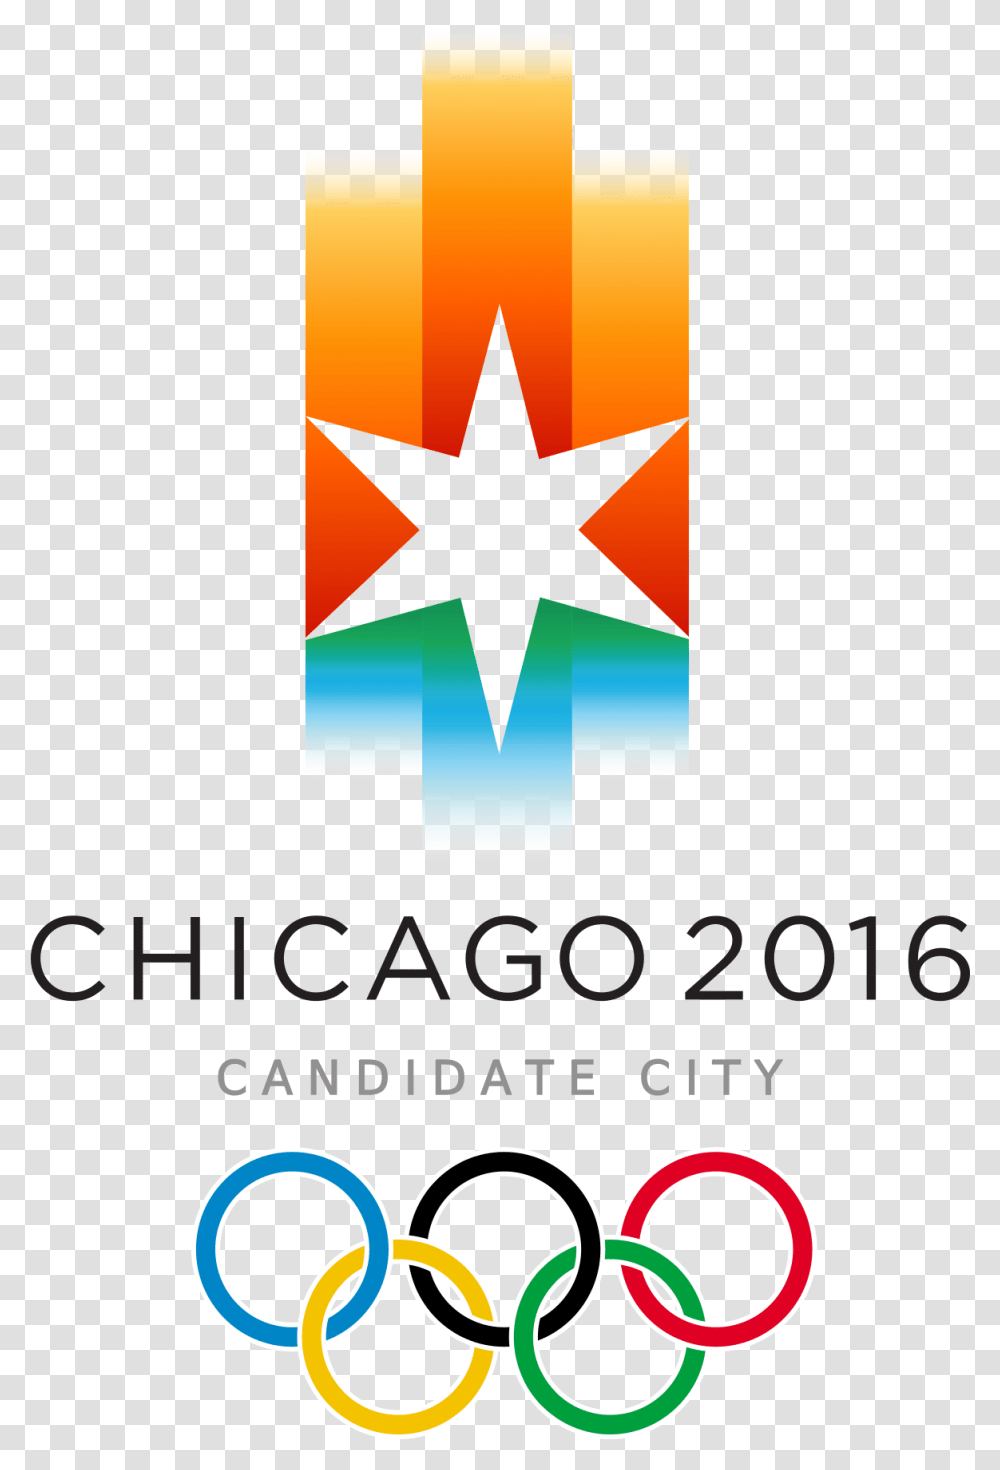 Chicago 2016 Candidate City, Star Symbol, Poster Transparent Png